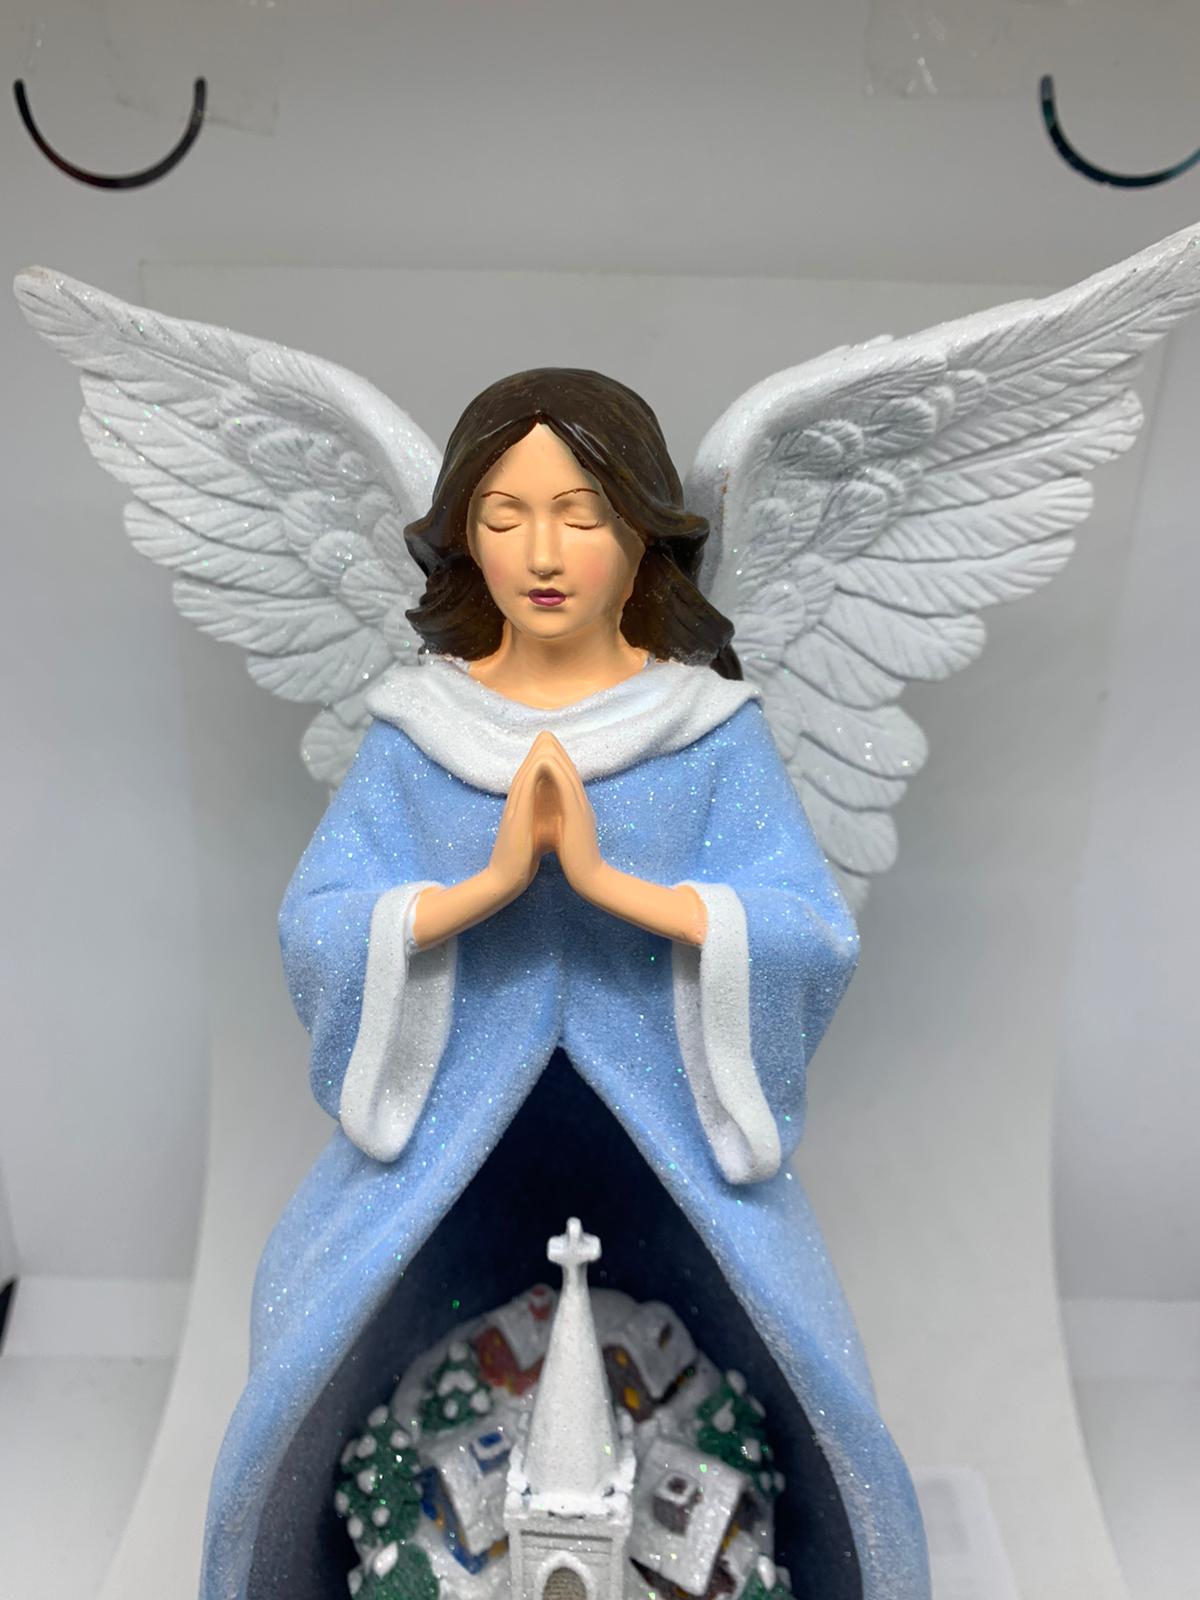 Illuminated Angel Figure with Scene by Valerie